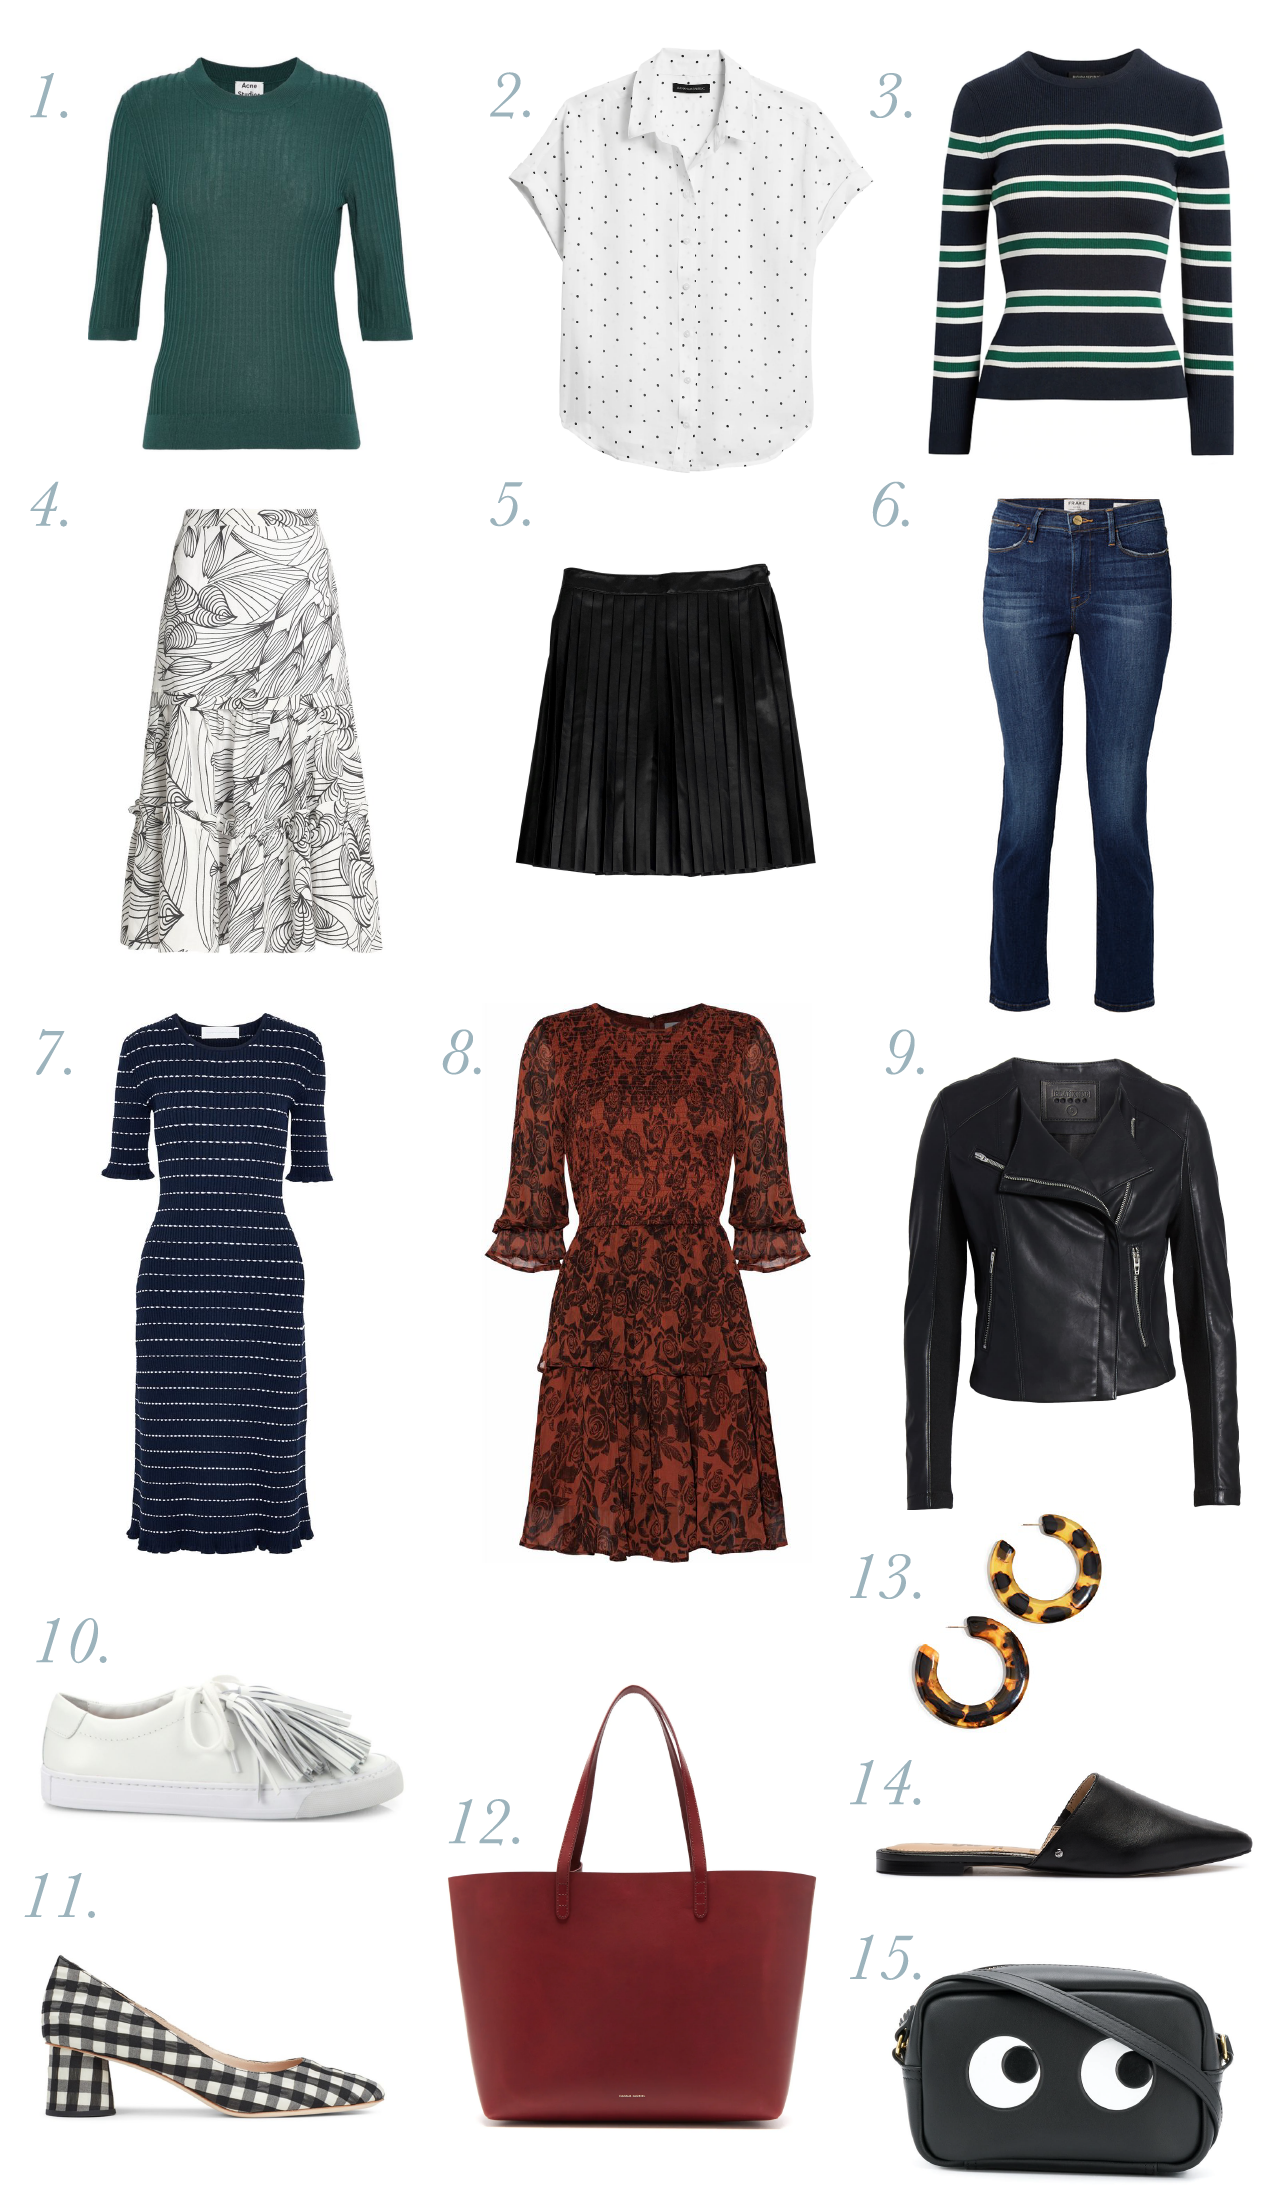 How to Pack Light for Europe in the Fall | Packing a fall travel capsule wardrobe is one of my favorite ideas for creating mix-and-match outfits from your closet. Whether you’re traveling for ten days or ten weeks, this travel capsule guide will hel…